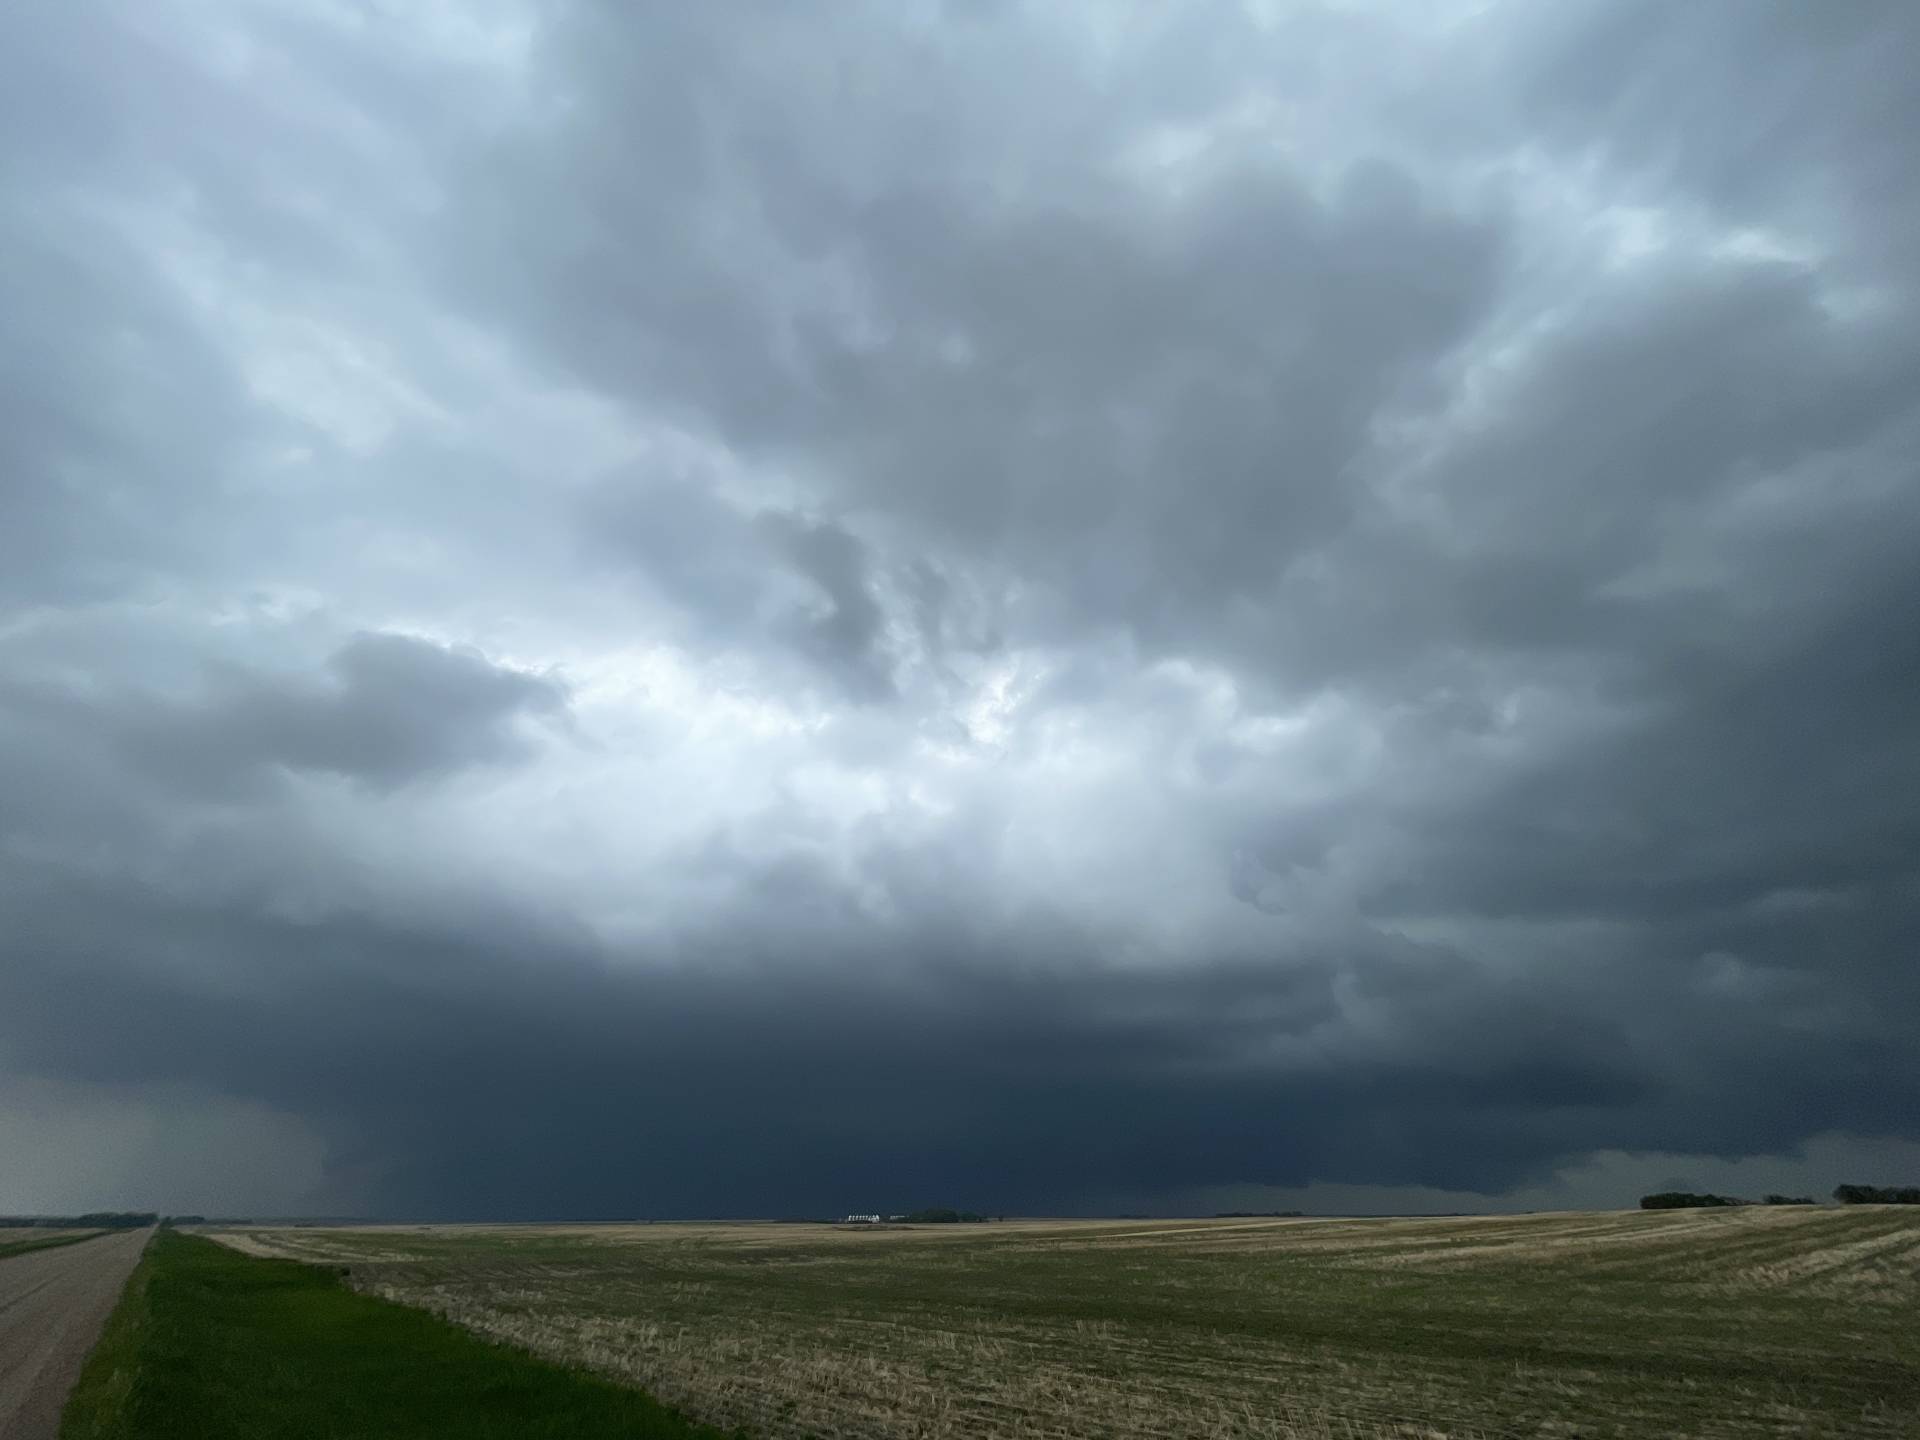 The storms have congealed and I’m behind the lead cell… dropping south for tail end Charlie #sktorm 5:11pm